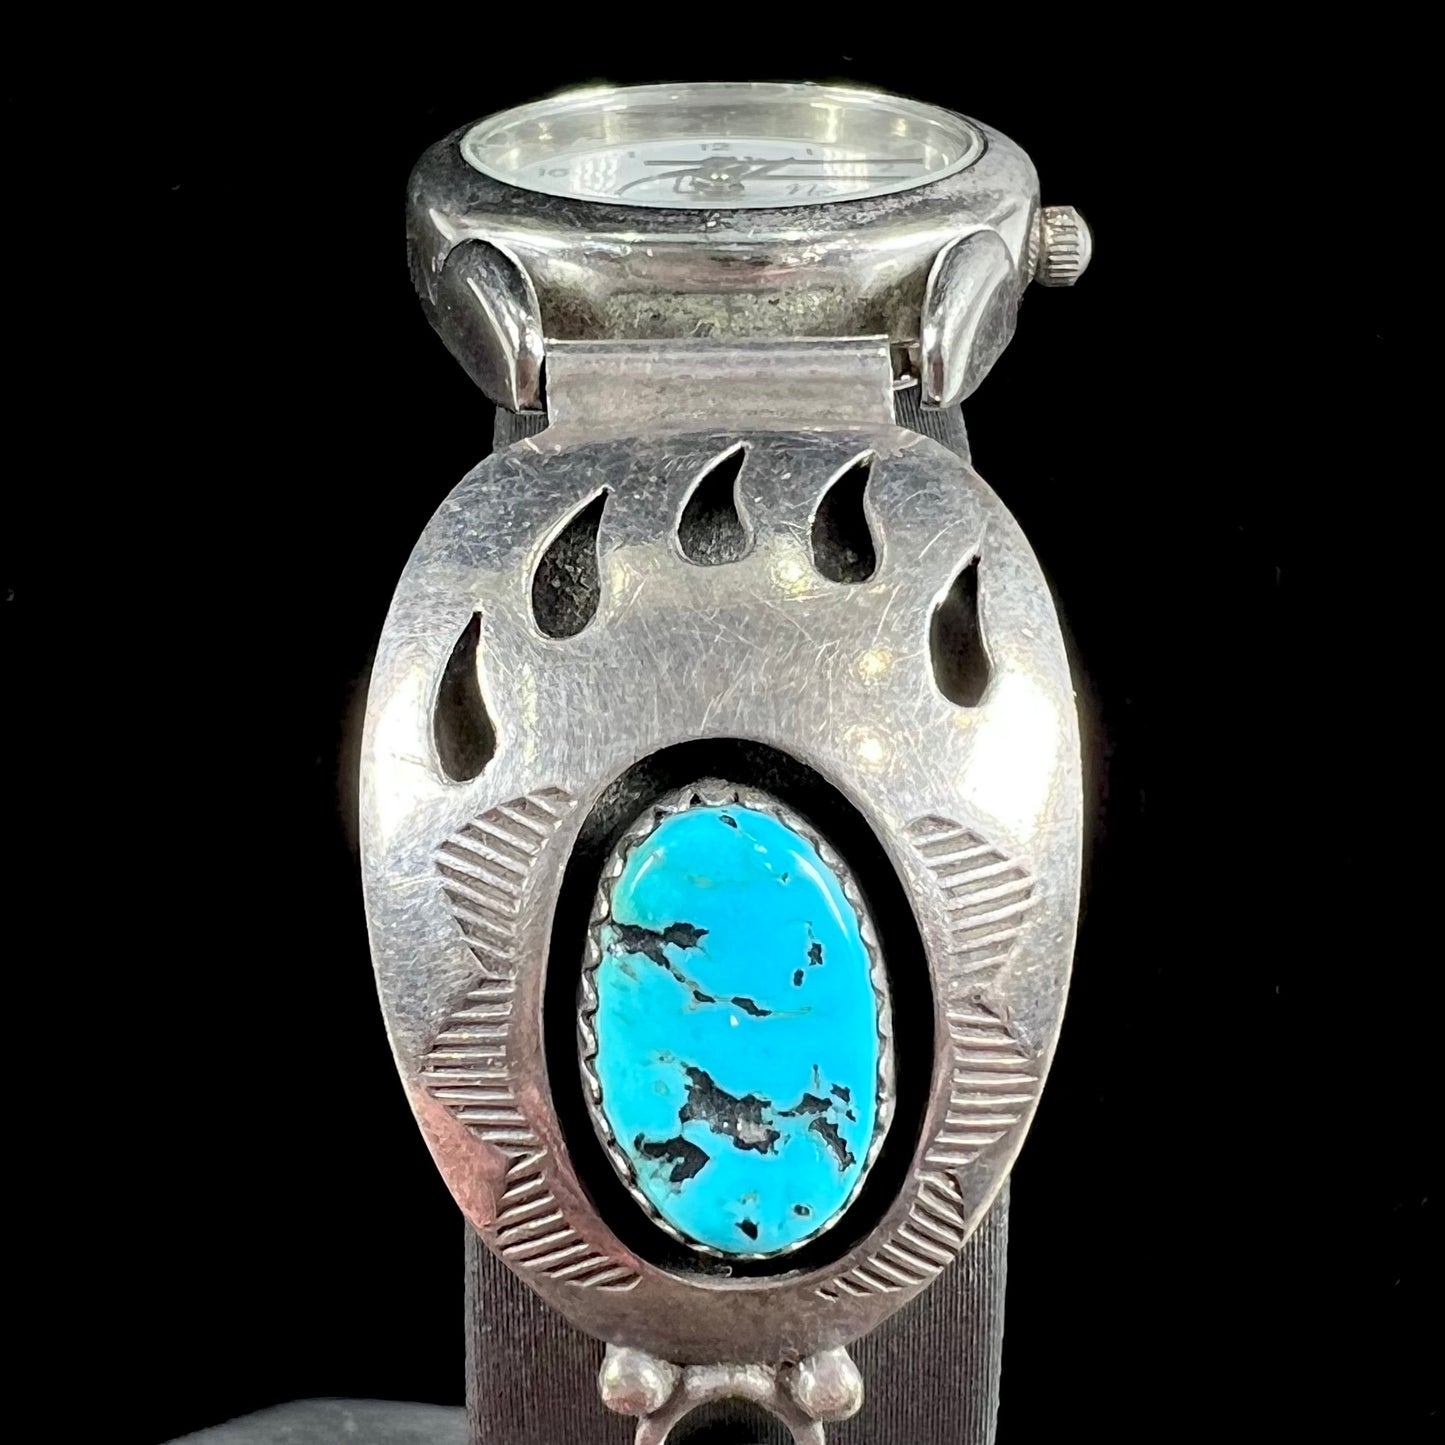 A watch set with two turquoise stones handmade by Navajo artists Arnold and Carleena Goodluck.